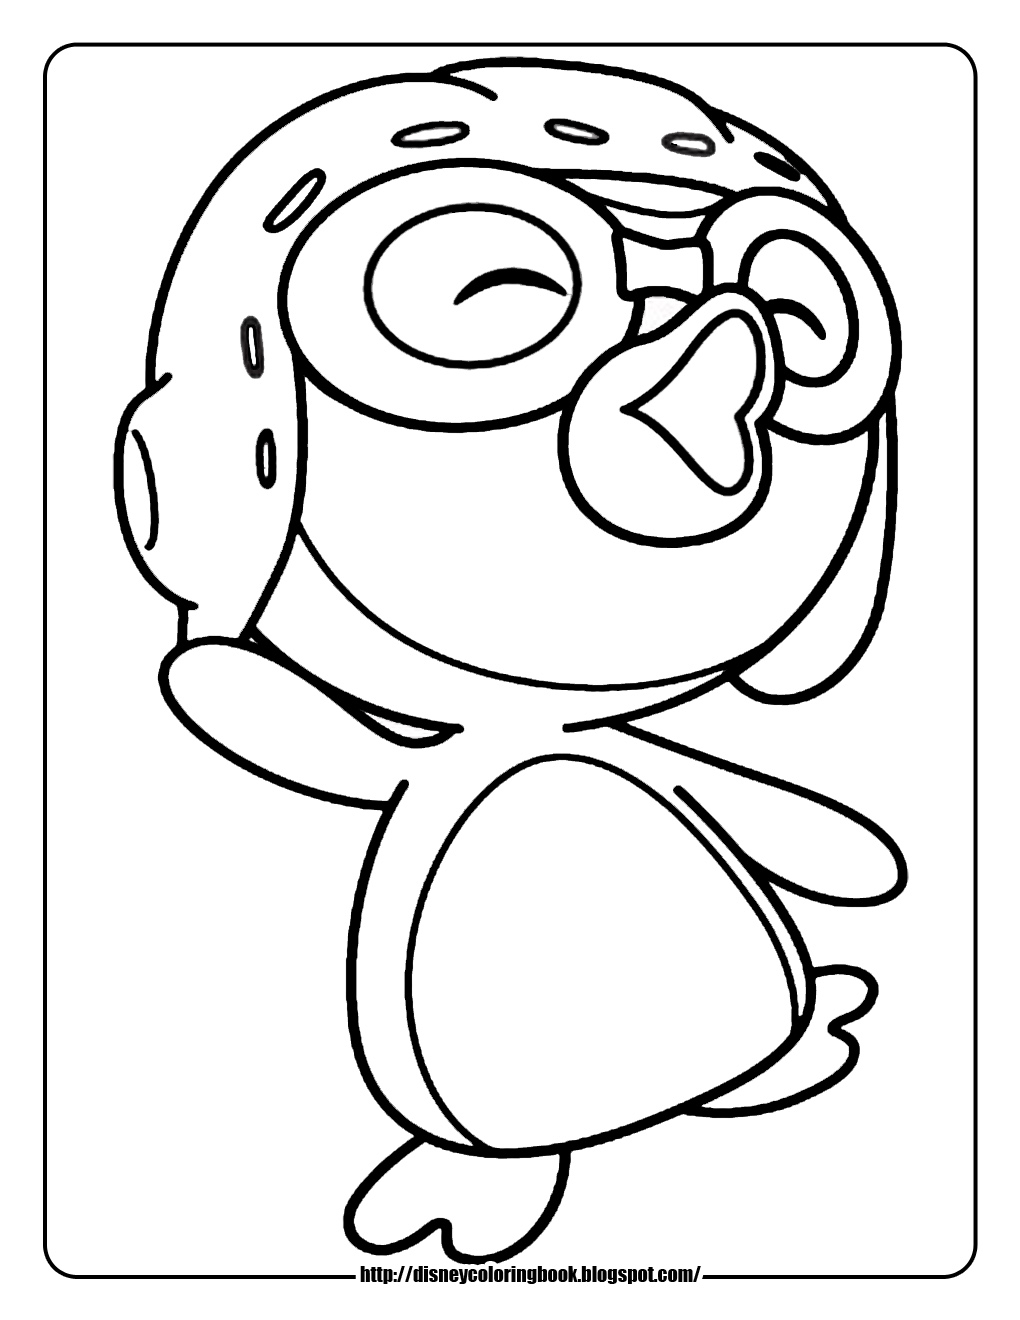 penguin colouring page 8 cartoon coloring pages jpg ai illustrator download page penguin colouring 